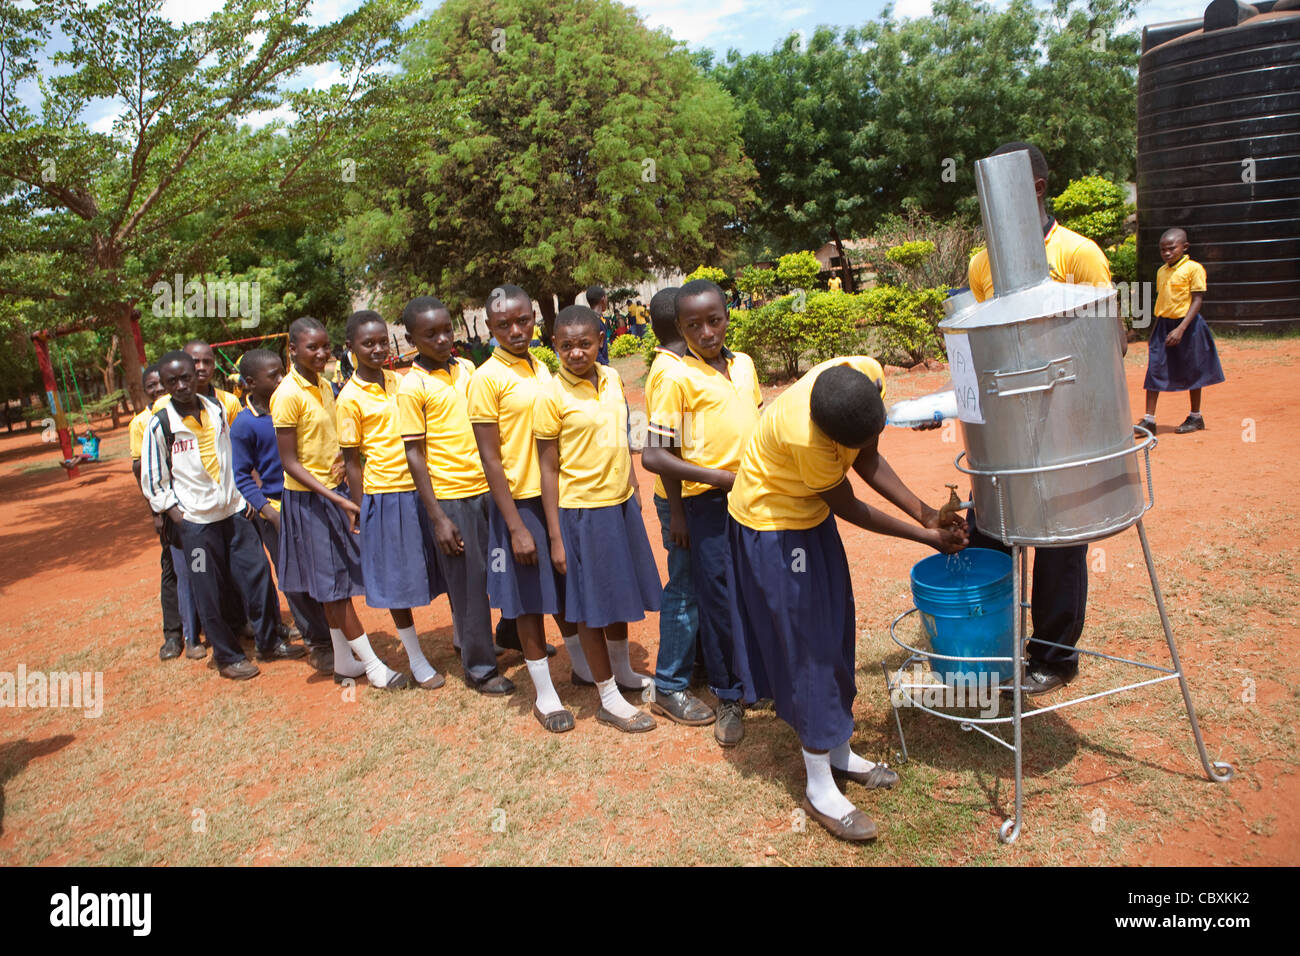 Students queue to wash their hands at a school in Morogoro, Tanzania, East Africa. Stock Photo